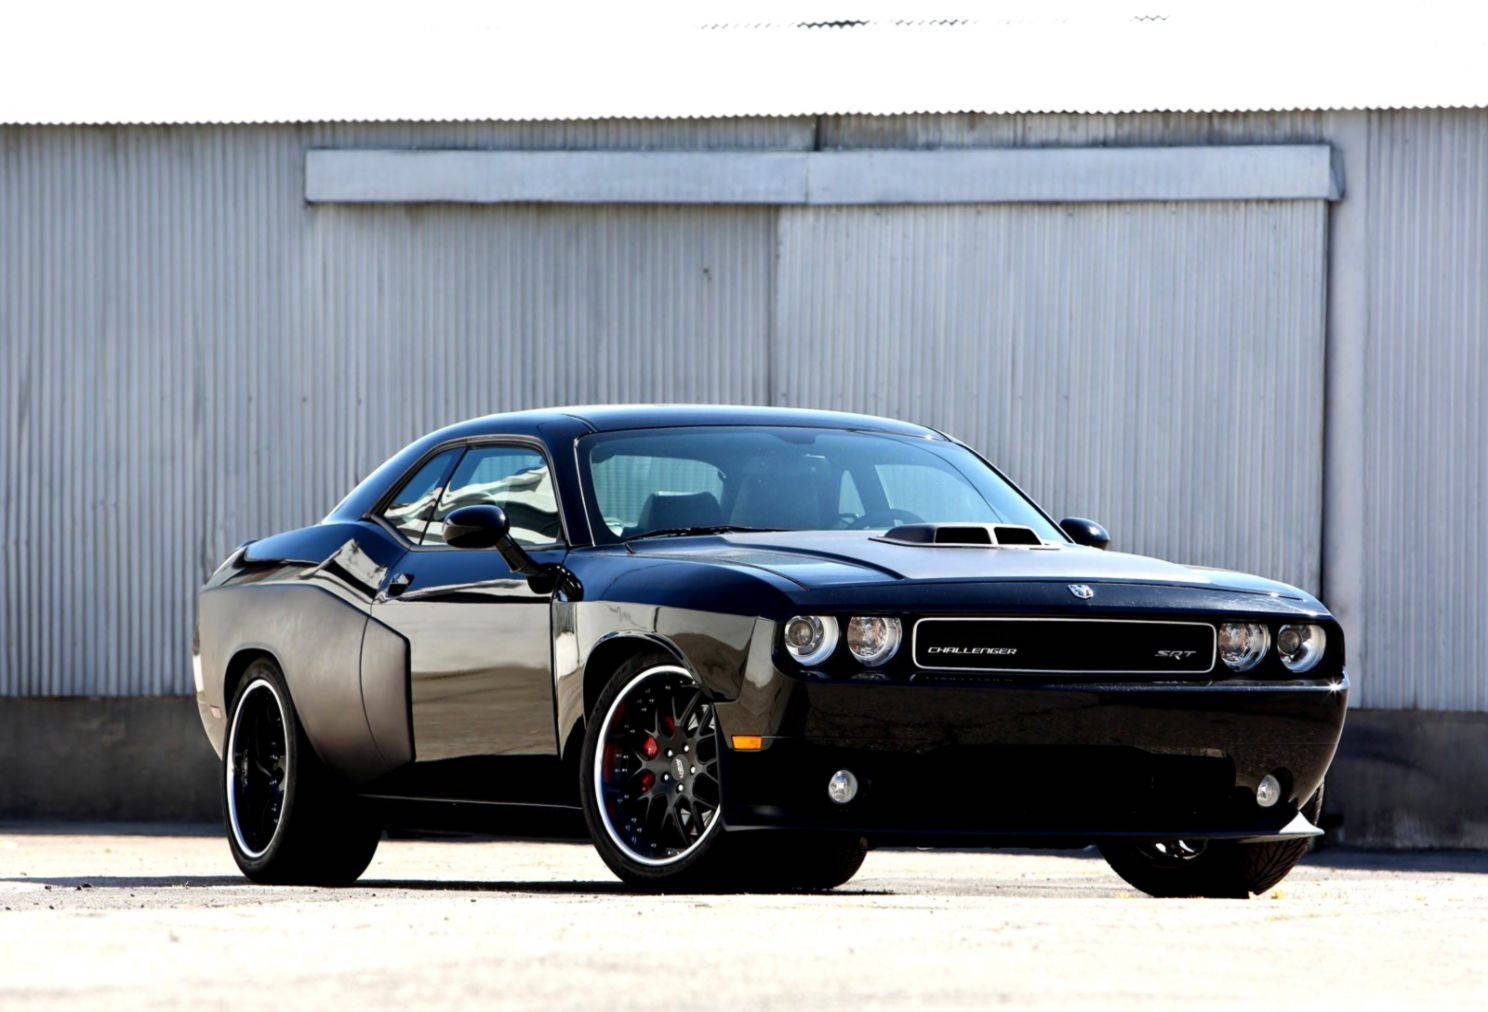 A Black Dodge Challenger Parked In Front Of A Building Wallpaper